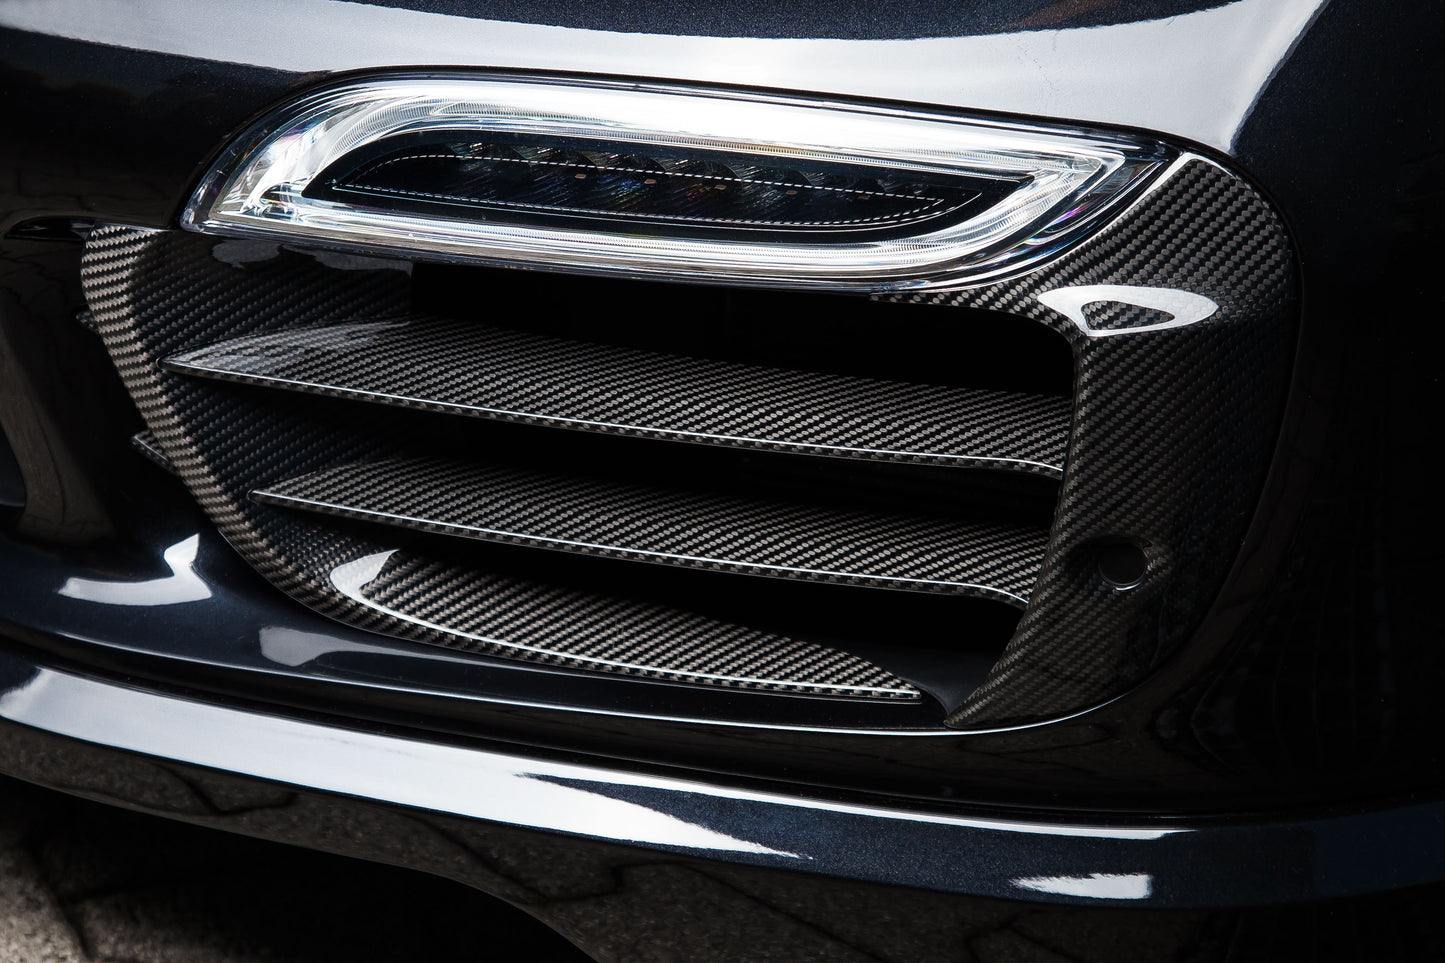 TECHART Carbon Grille Trim Bar, "glossy" for 991.1 Turbo S up to MY16